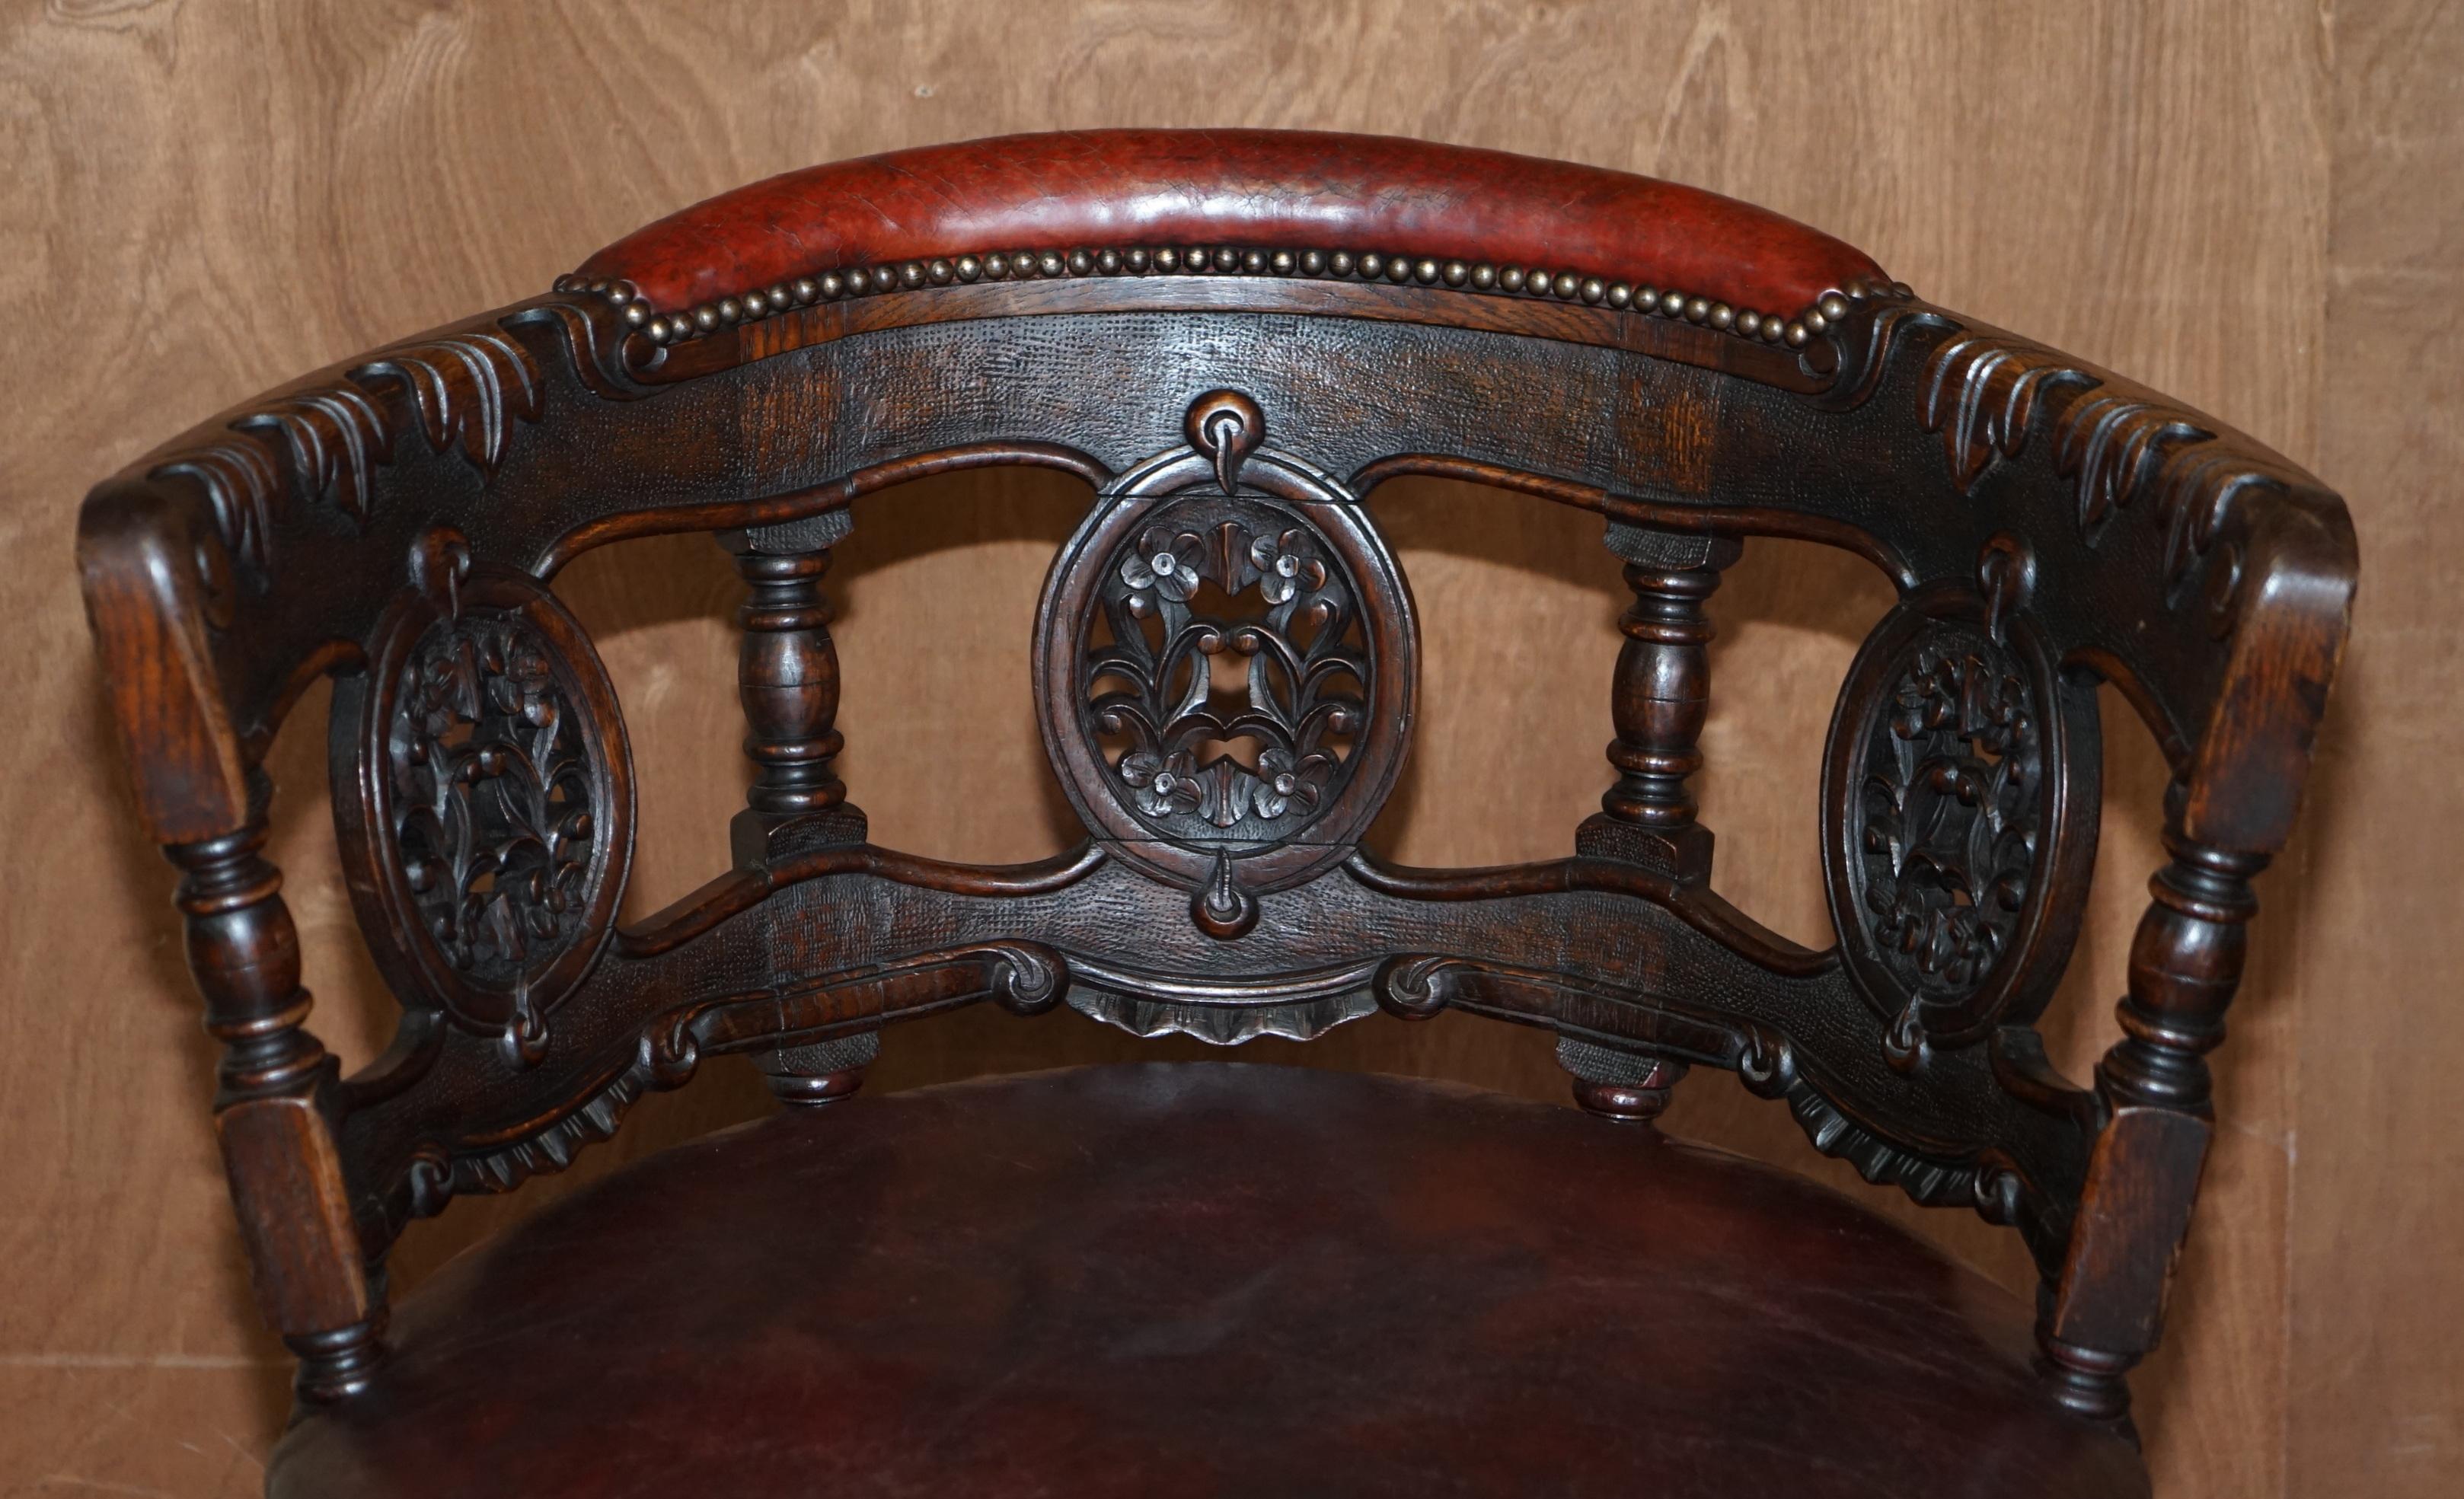 Hand-Crafted Antique Carved Victorian Oxblood Leather Burgermeister Chair 17th Century Design For Sale